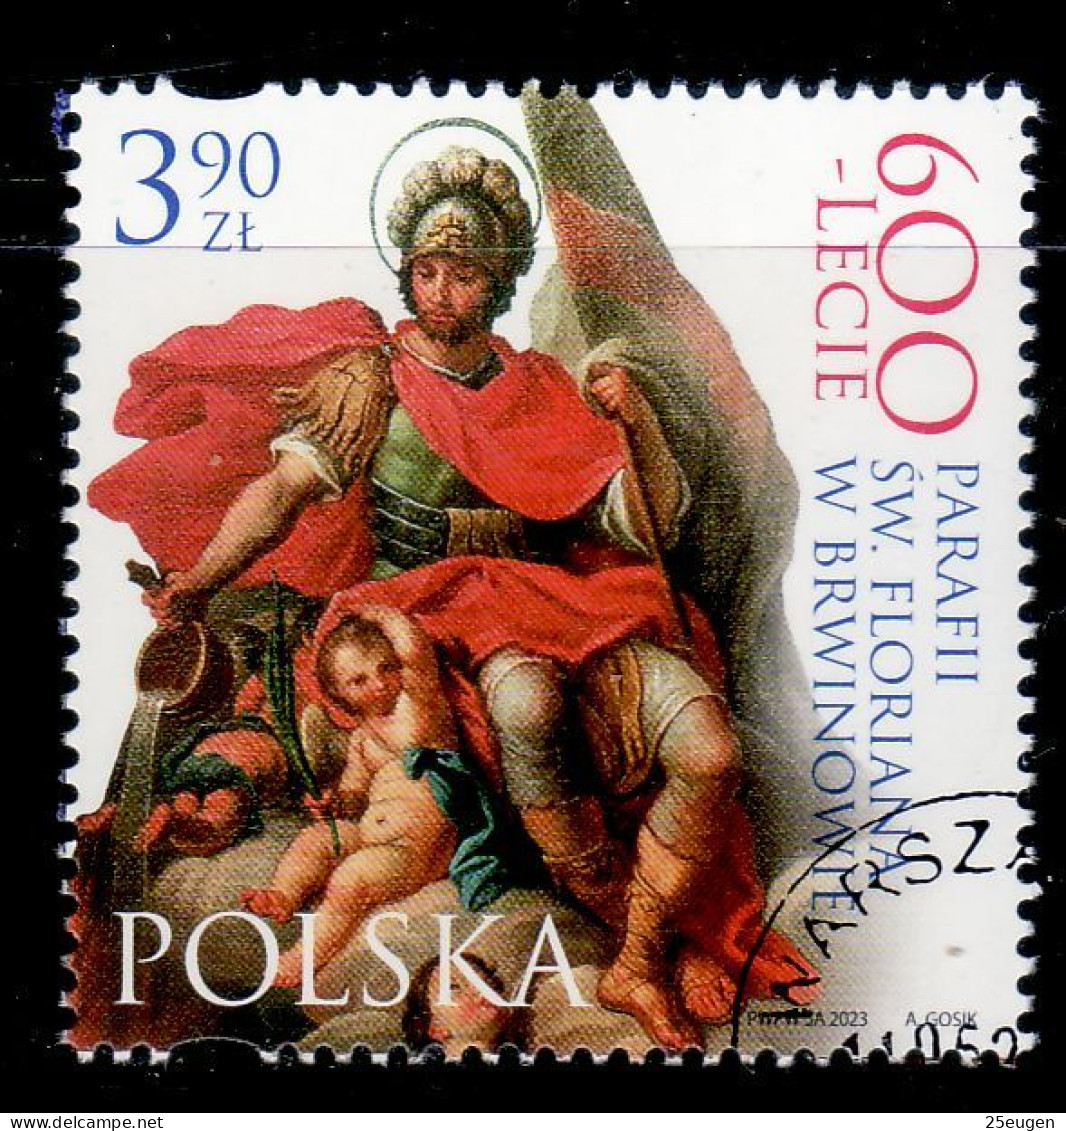 POLAND 2023  600th Anniversary Of The Parish Of St. Florian In Brwinów  USED - Oblitérés